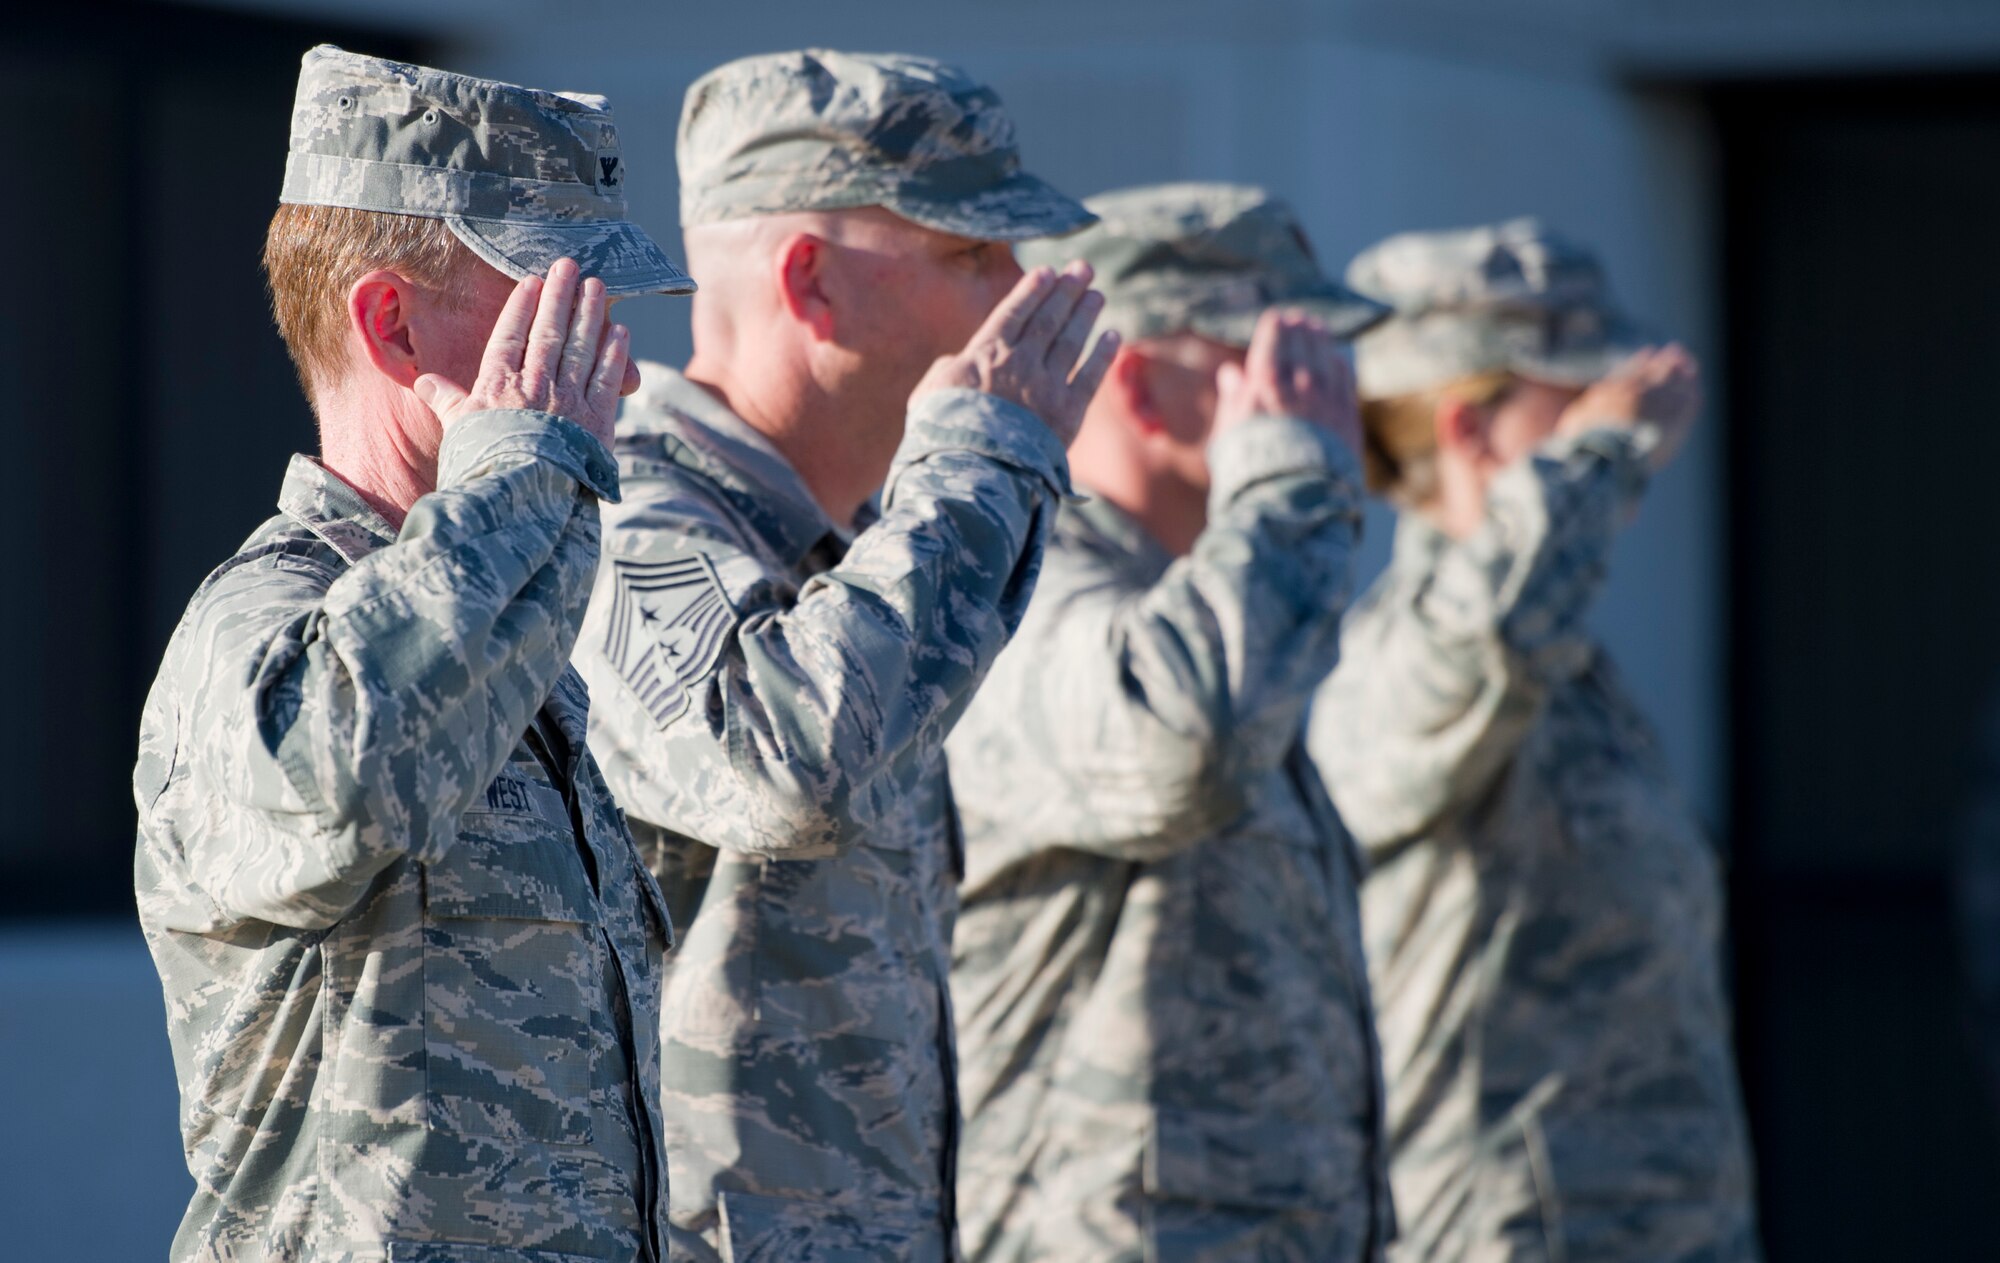 Leadership from the 1st Special Operations Wing salute as the United States flag is lowered during a retreat ceremony at Hurlburt Field, Fla., Oct. 8, 2014. The retreat ceremony serves a twofold purpose; it signals the end of the official duty day and serves as a ceremony for paying respect to the flag. (U.S. Air Force photo/Senior Airman Krystal M. Garrett)